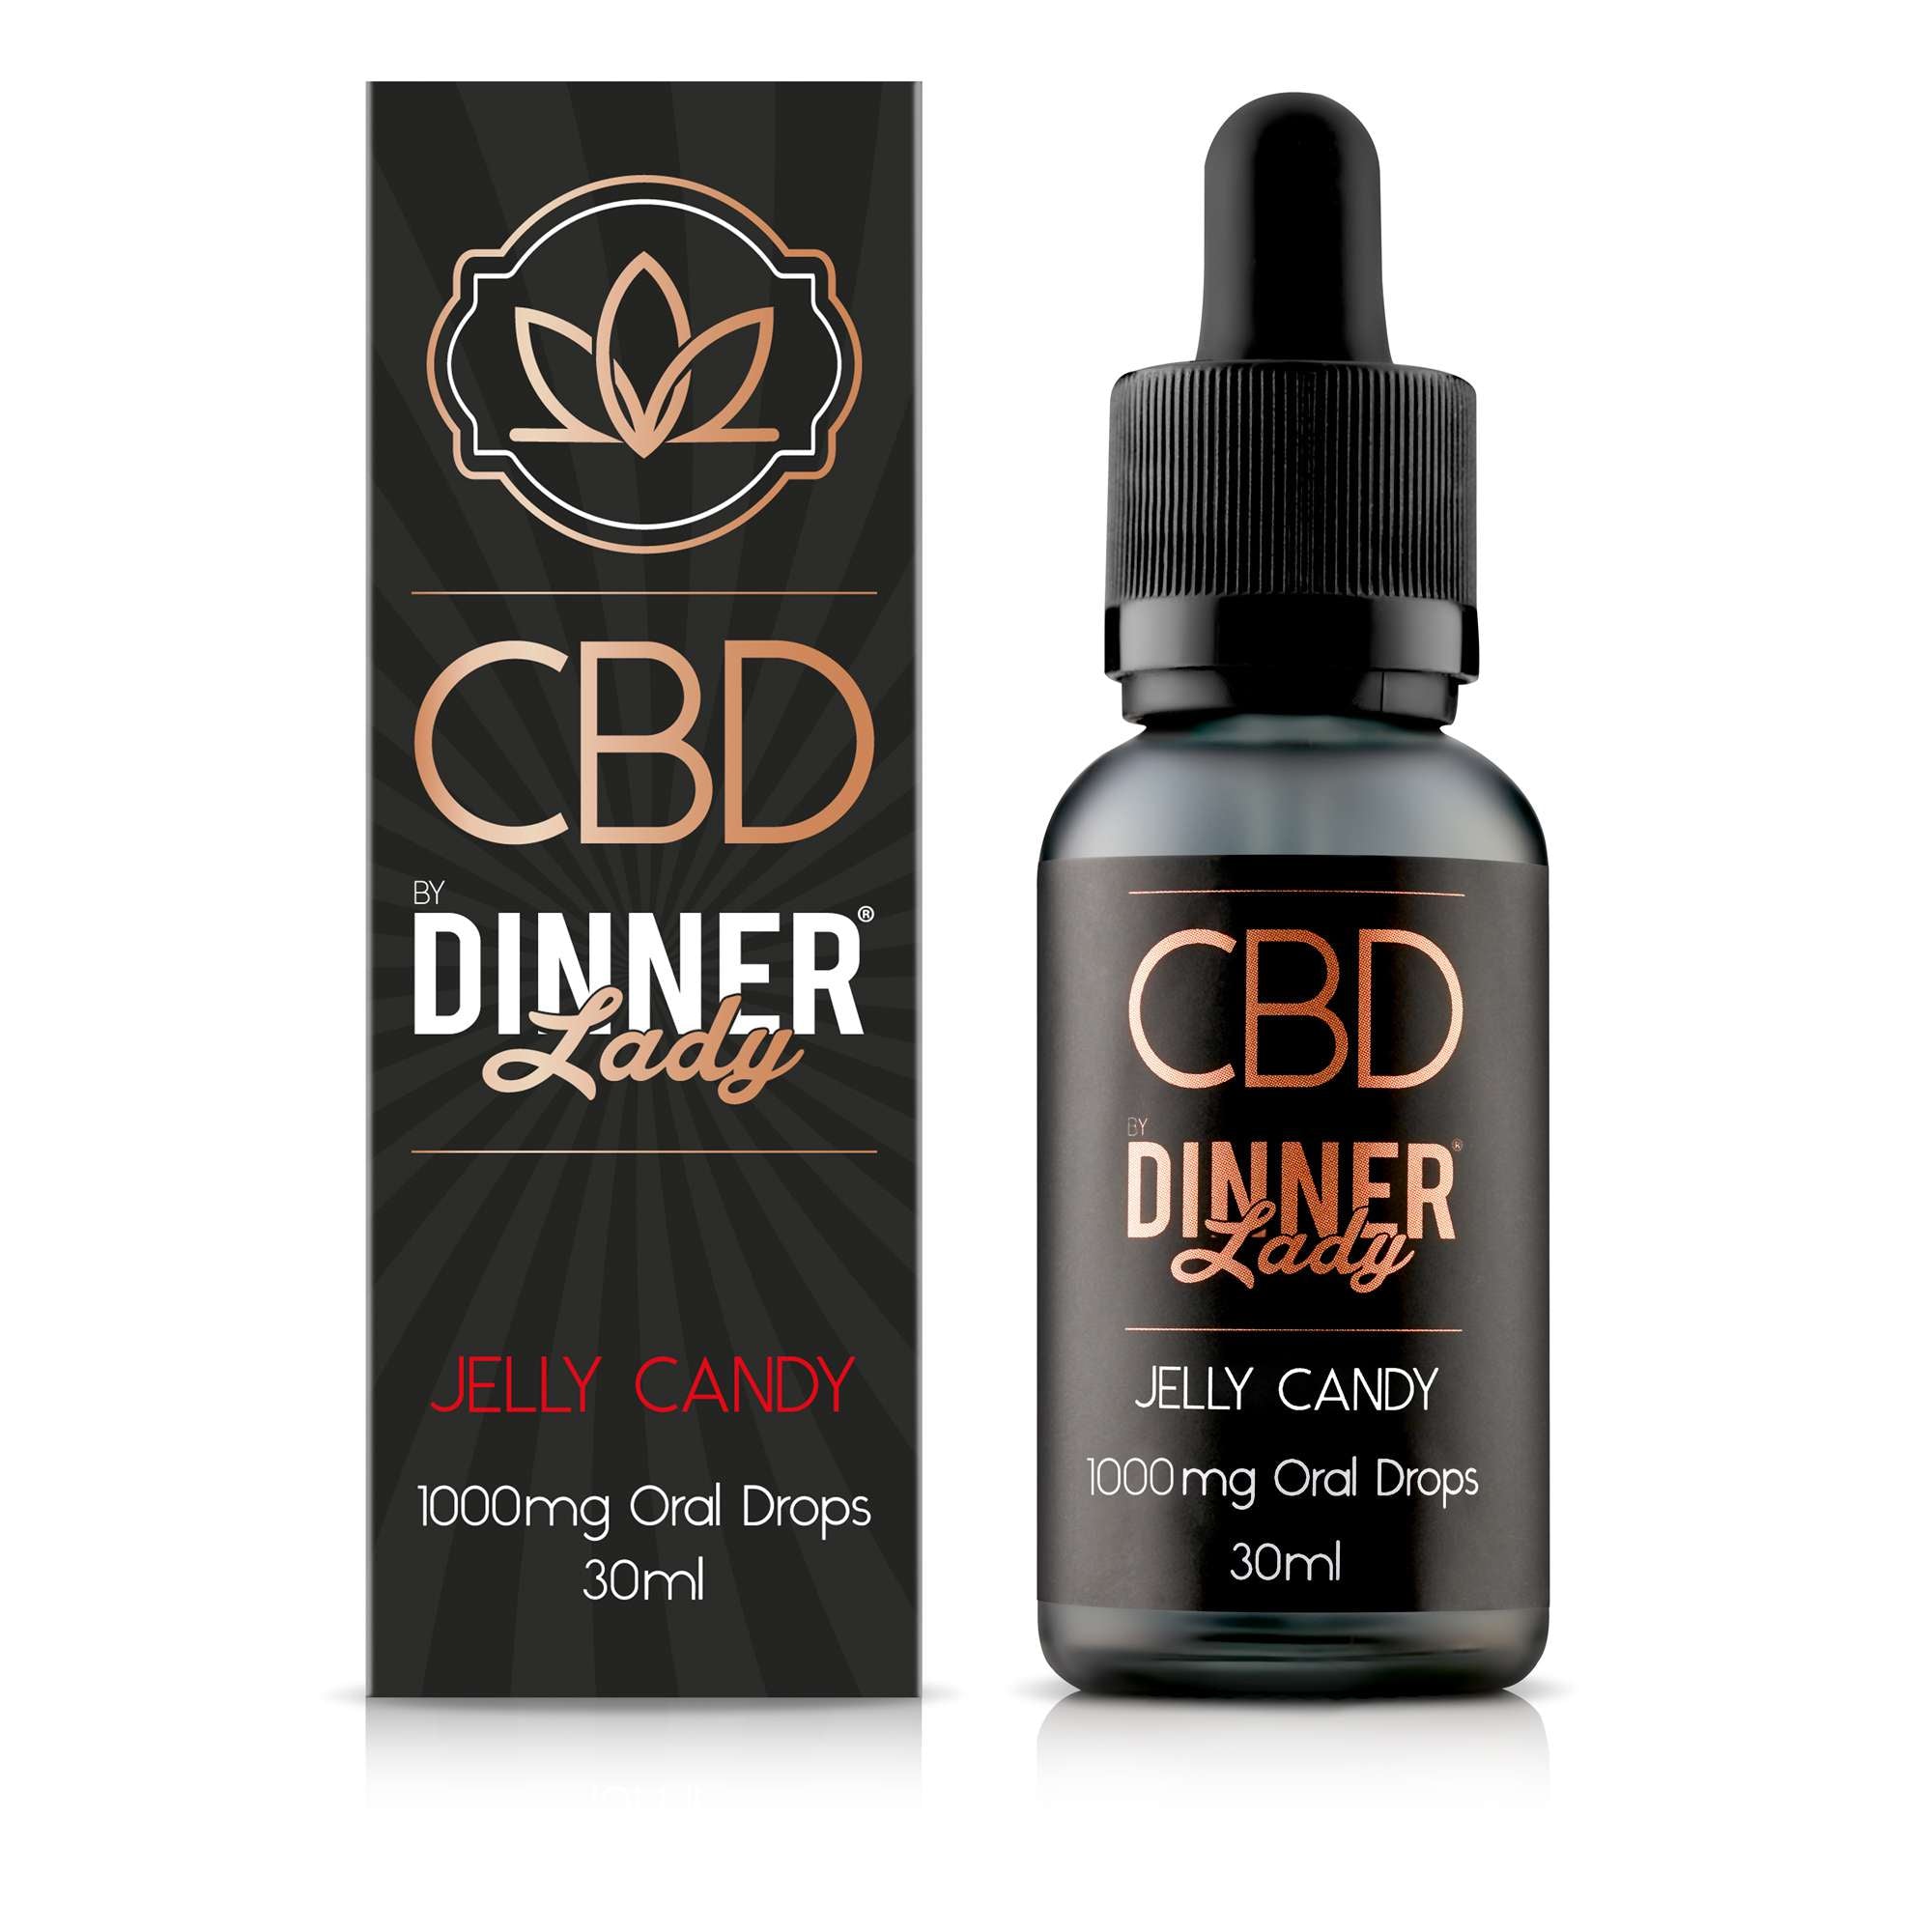 Dinner Lady CBD Jelly Candy oral drops / tinctures - 30ml - 1000mg